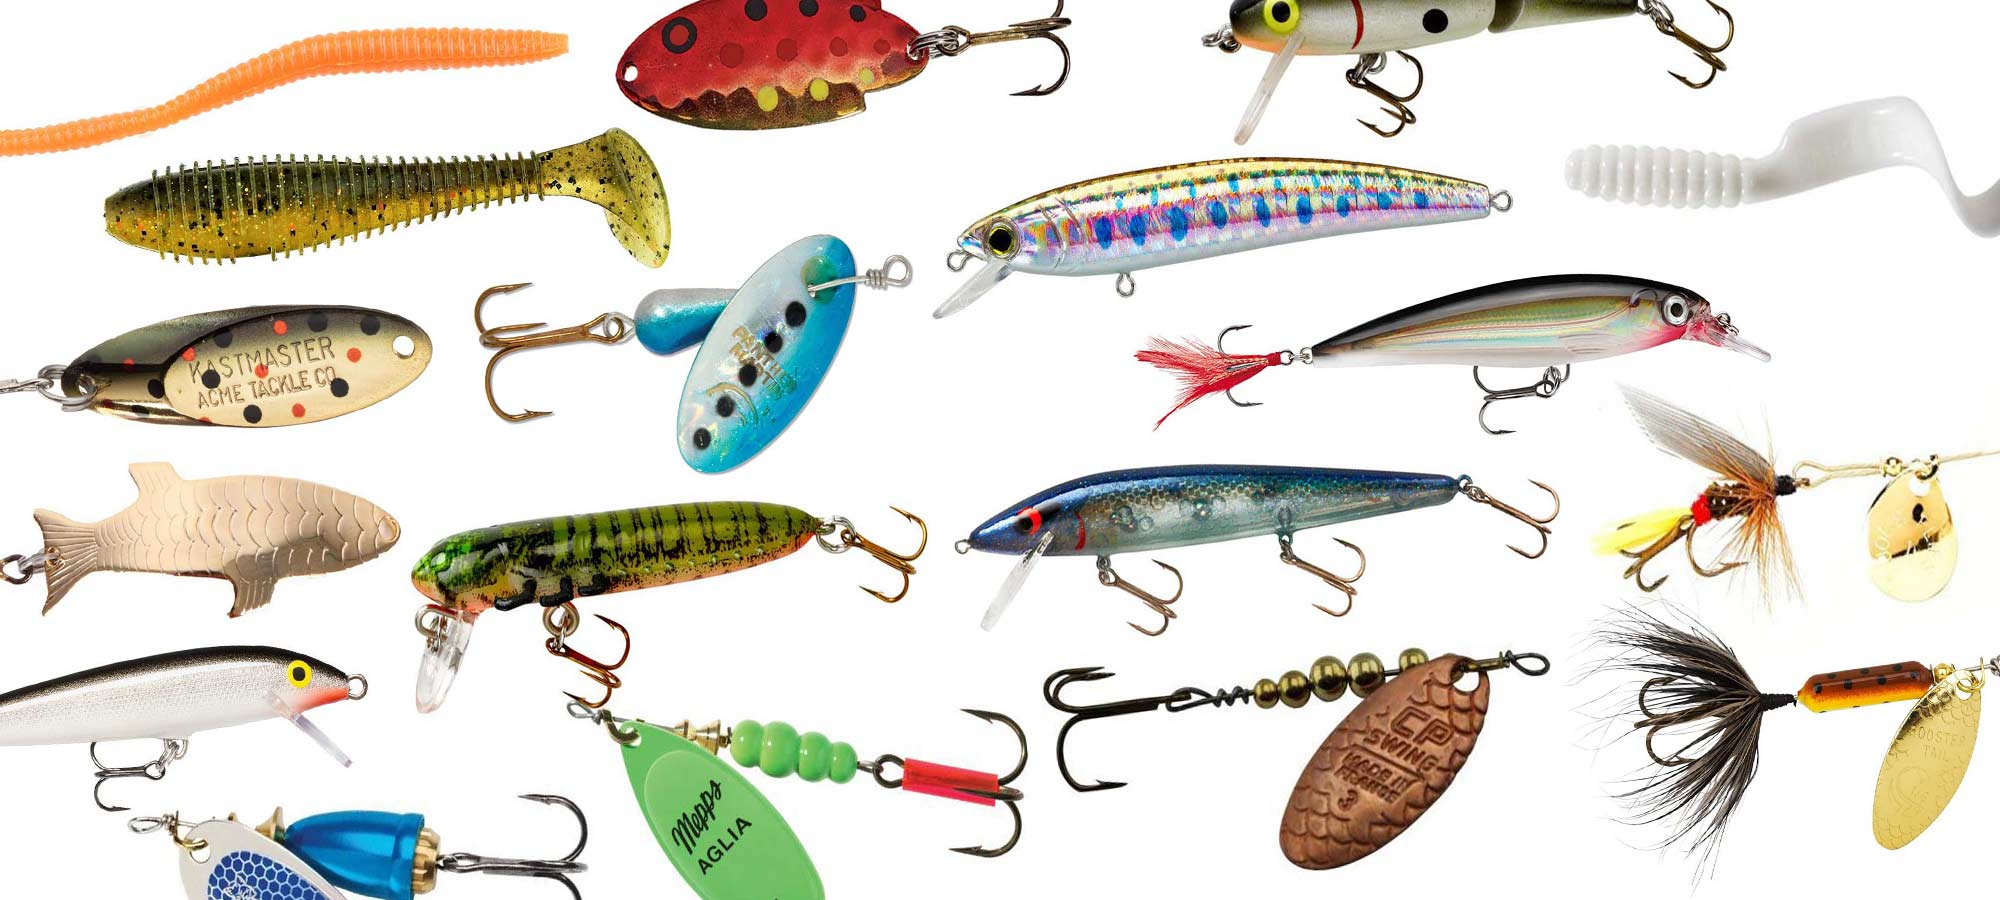 Best Bait For Rainbow Trout Top Sellers, SAVE 35% 